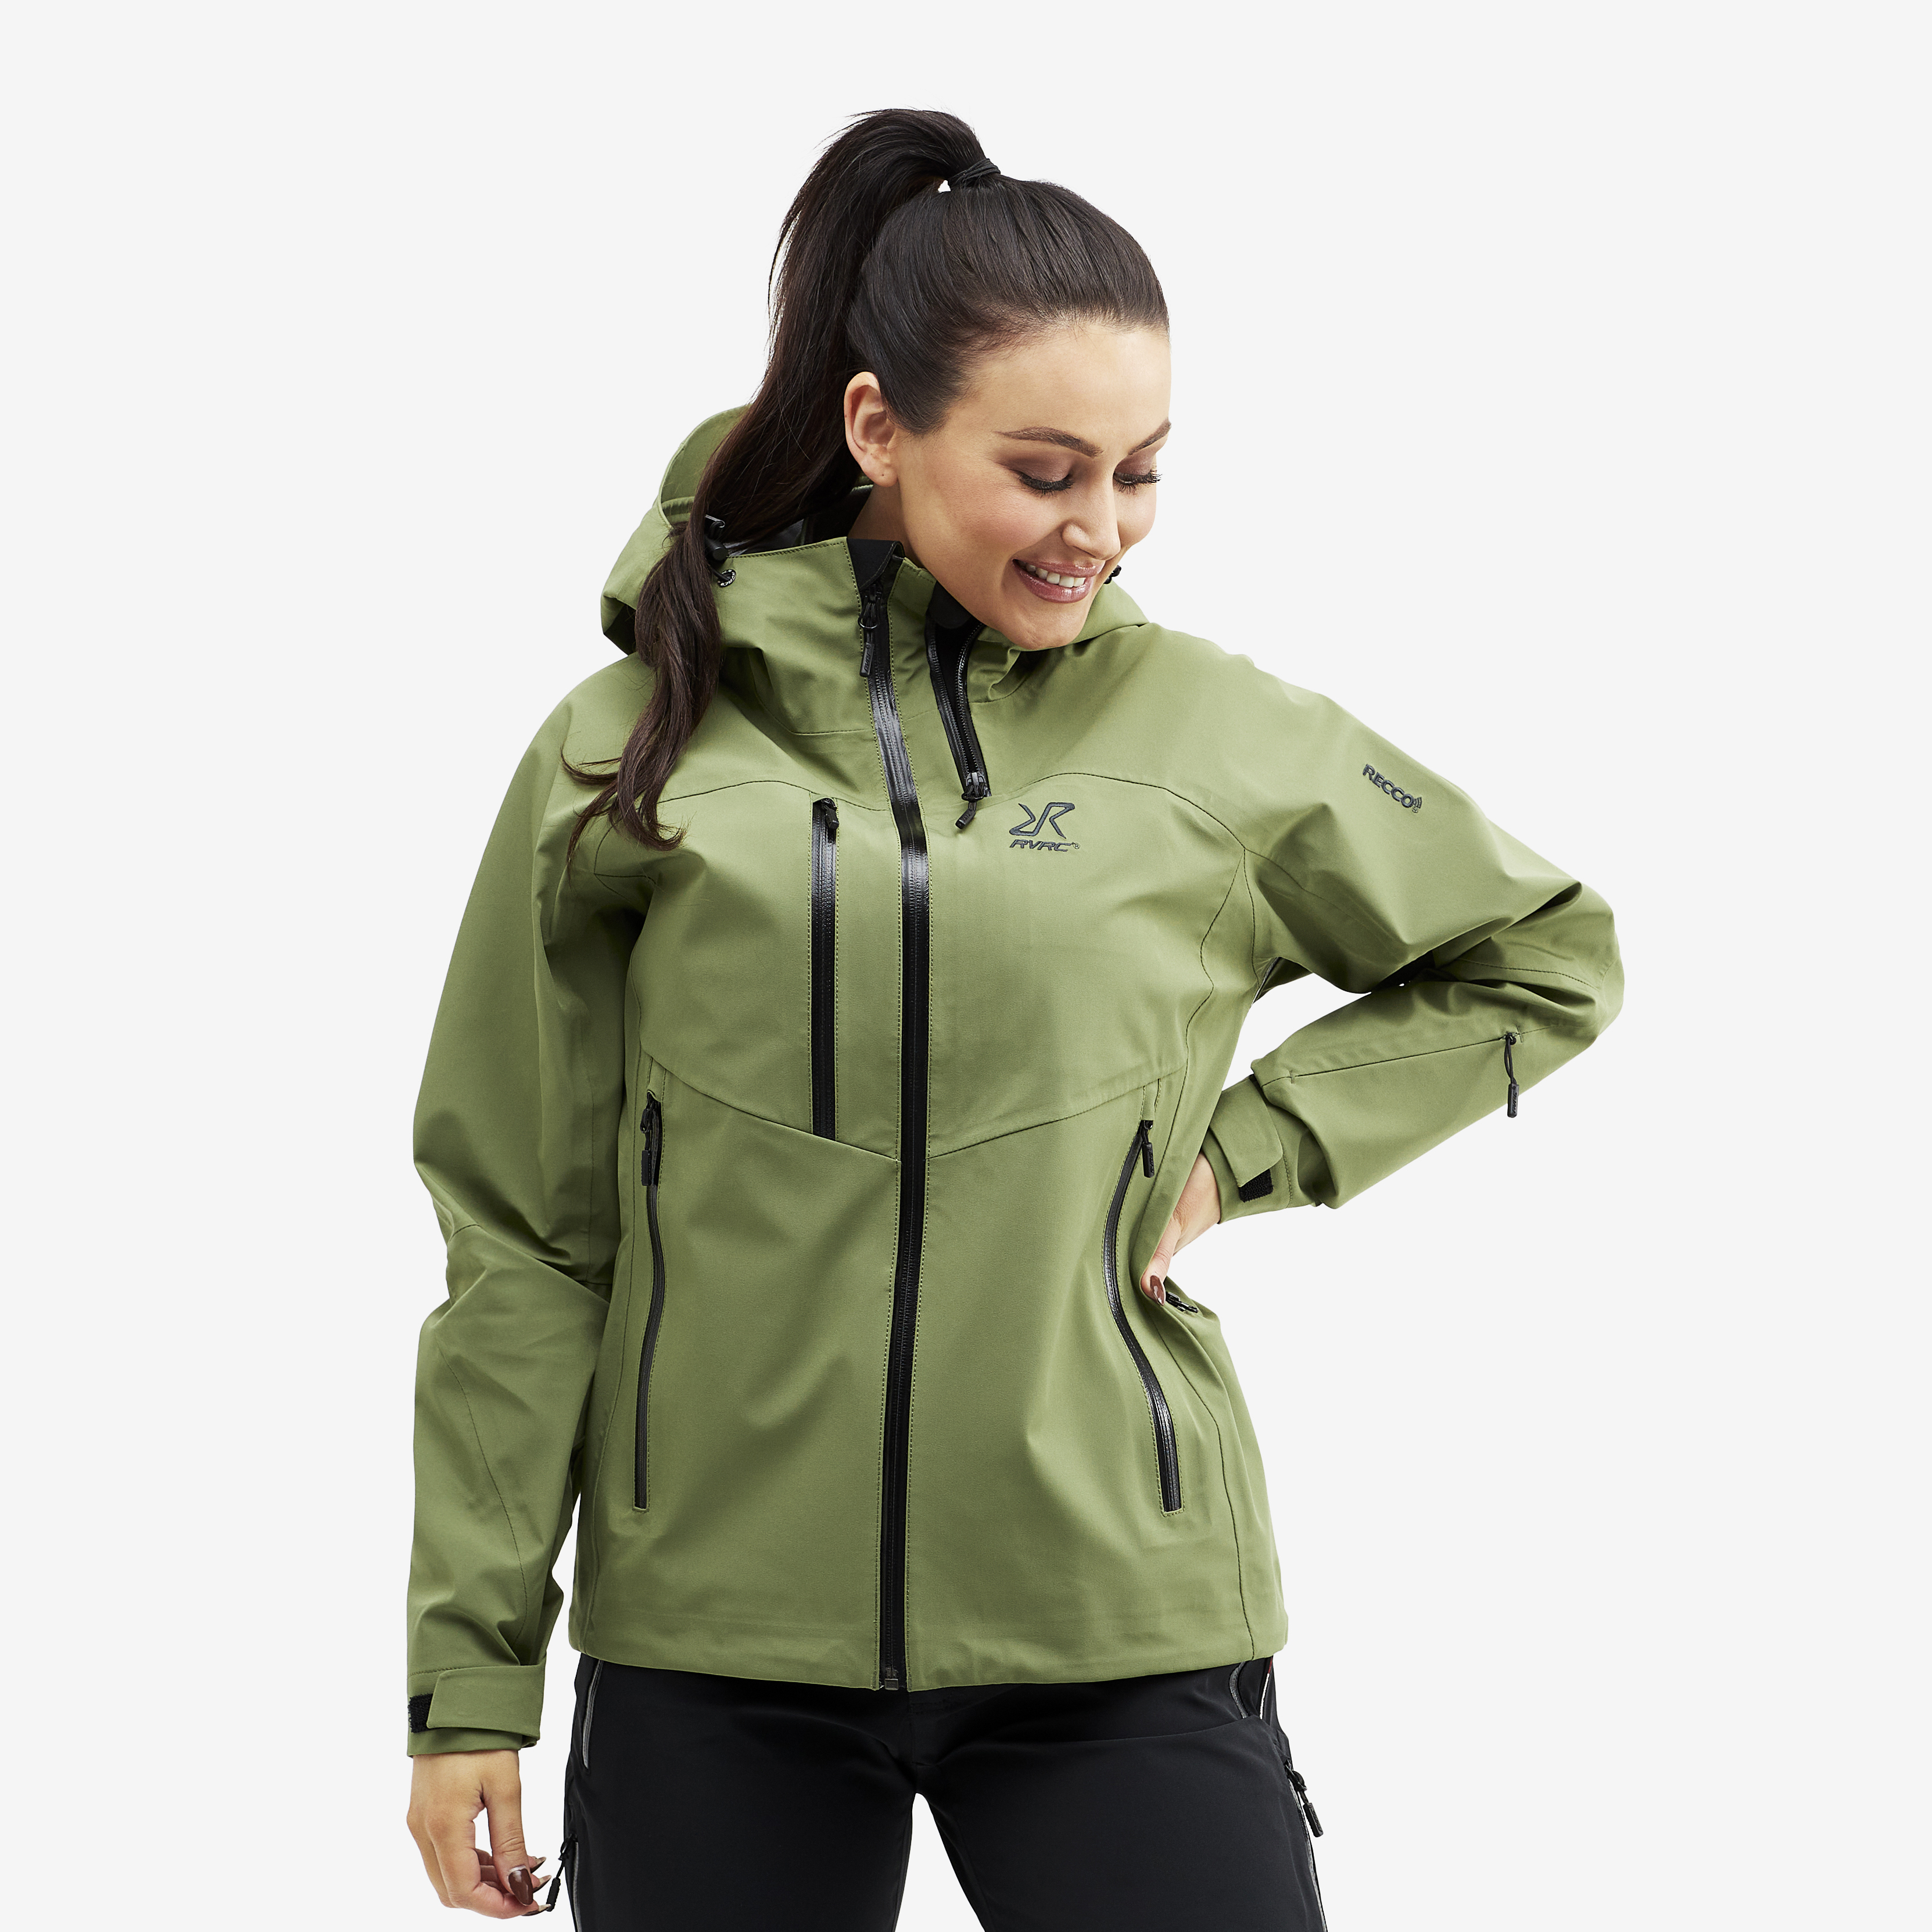 Cyclone Rescue Jacket 2.0 Pine Green